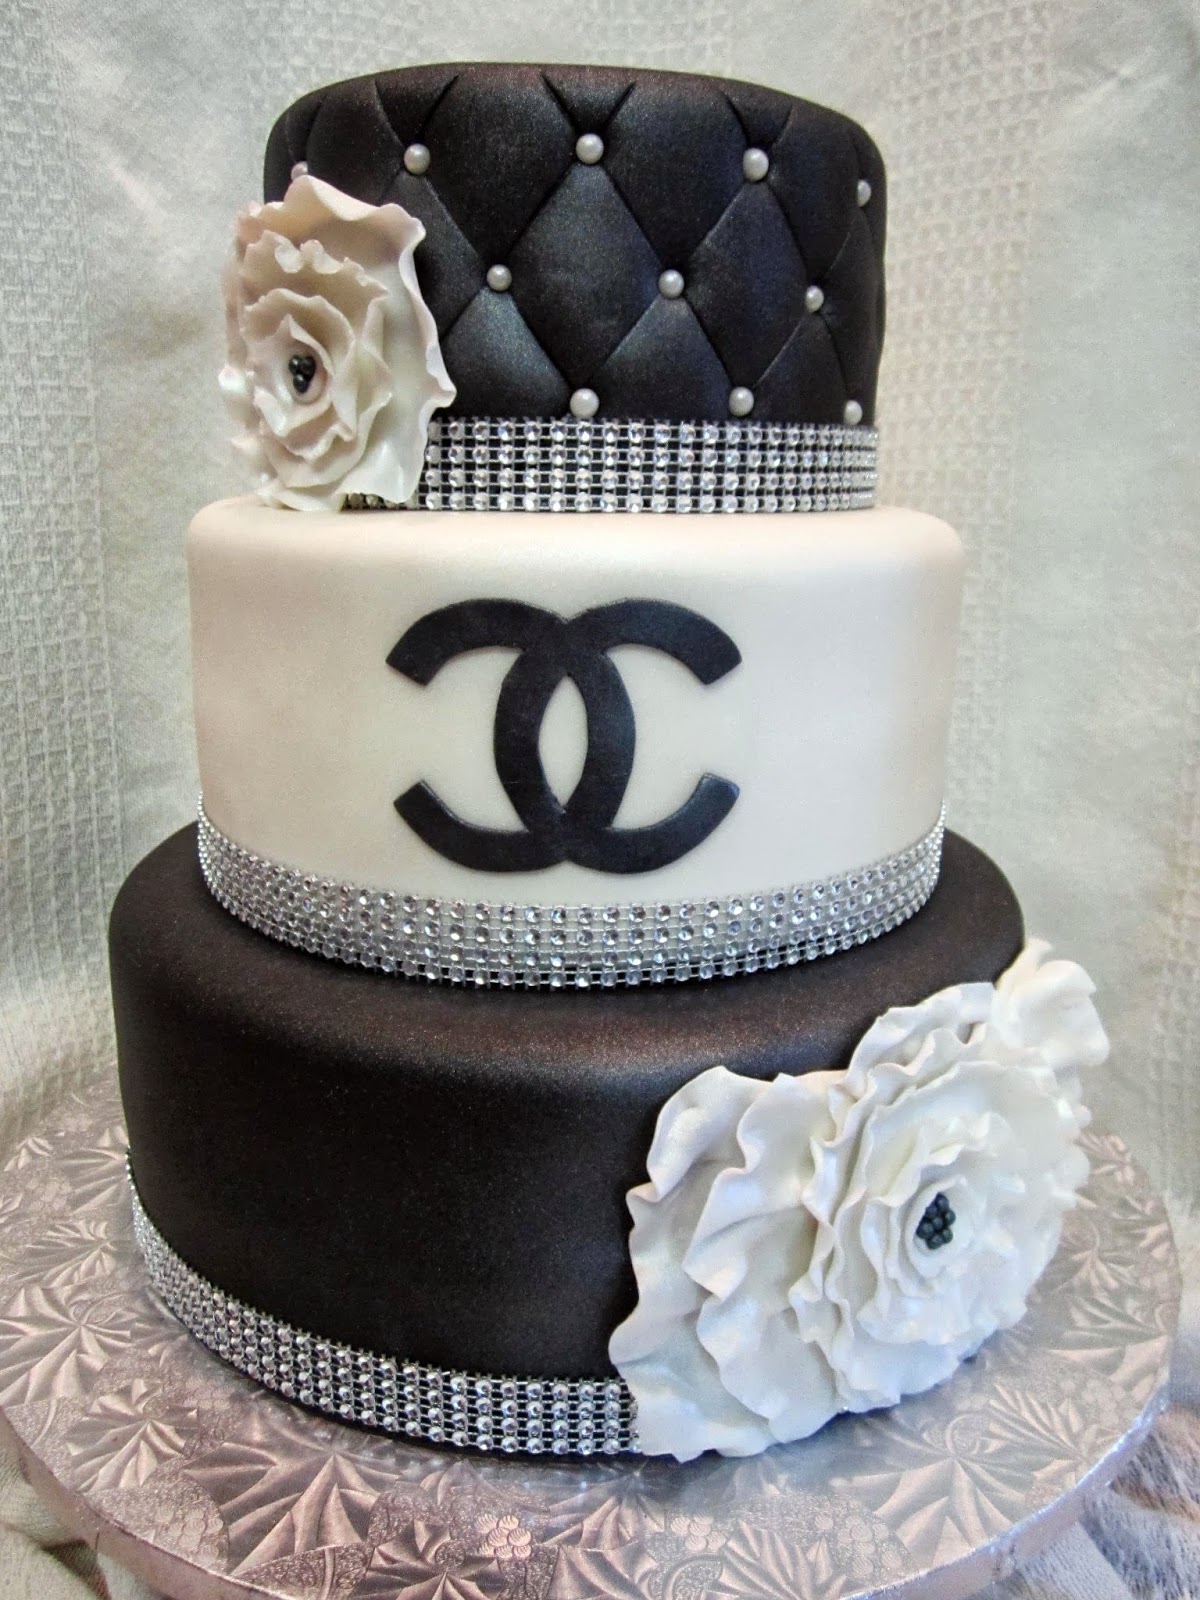 MyMoniCakes: Chanel Inspired Cake with quilted and ruffle accents